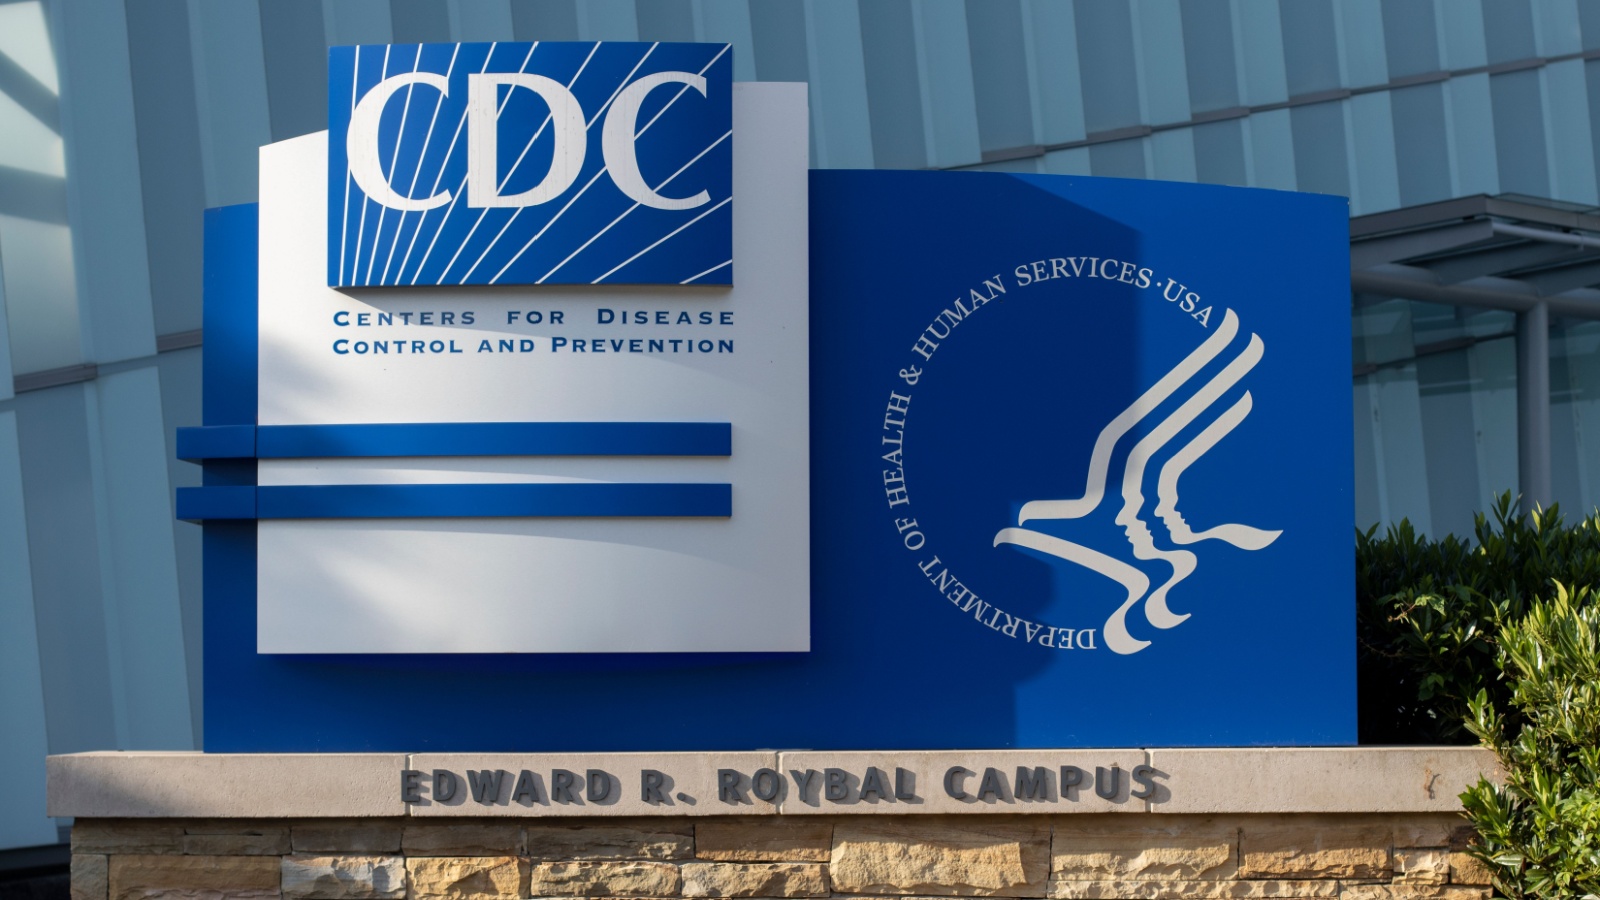 Closeup of the CDC logo seen at the Edward R. Roybal campus, the headquarters of the Centers for Disease Control and Prevention (CDC) in Atlanta, Georgia.